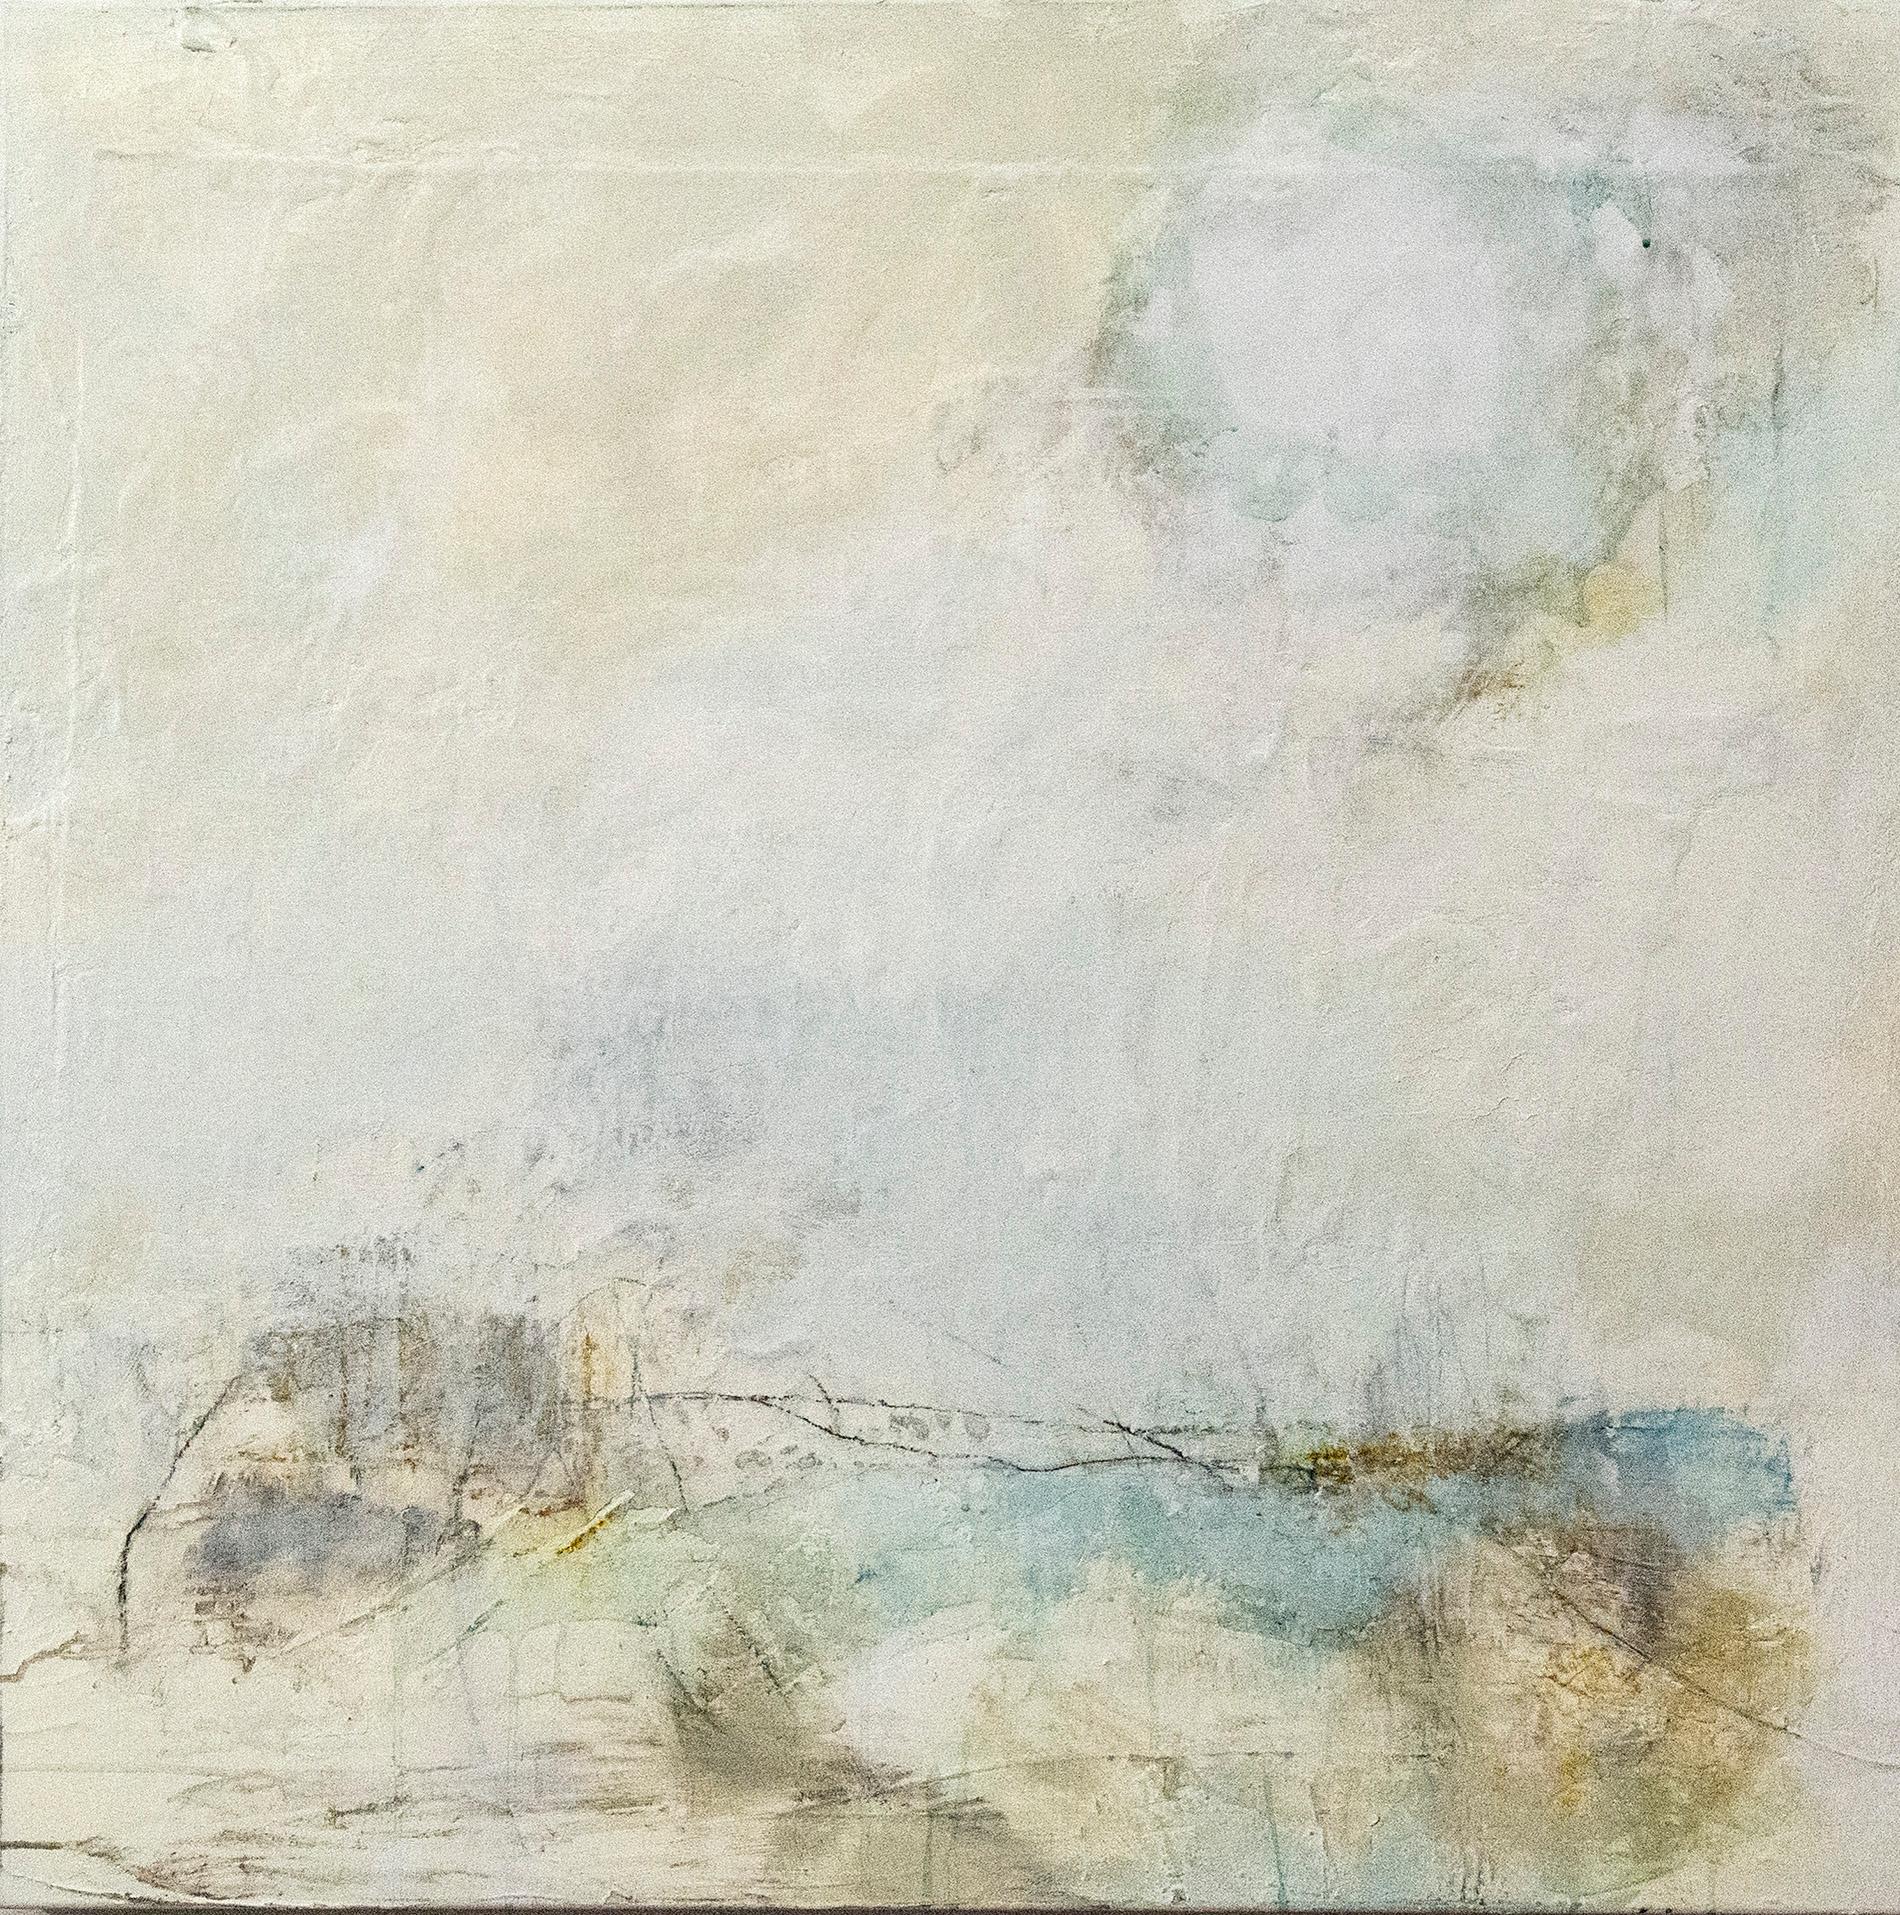 Lure Us Again - textured, muted pastel colours, abstract, acrylic on canvas - Painting by Sharon Kelly